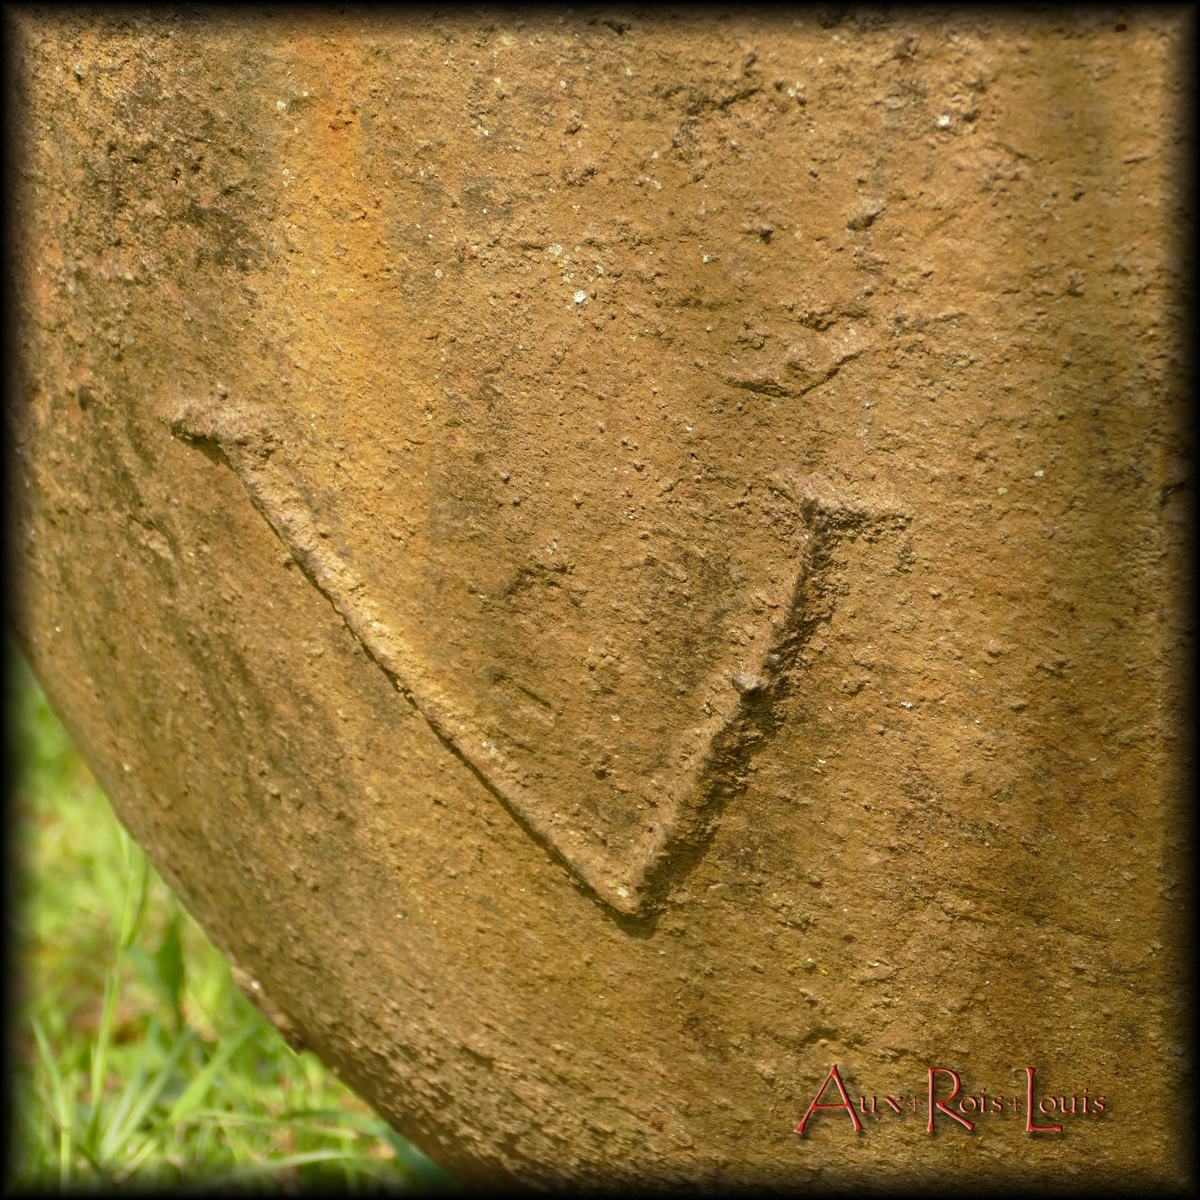 On its side the mark of a V, the signature of the master blacksmith who cast it